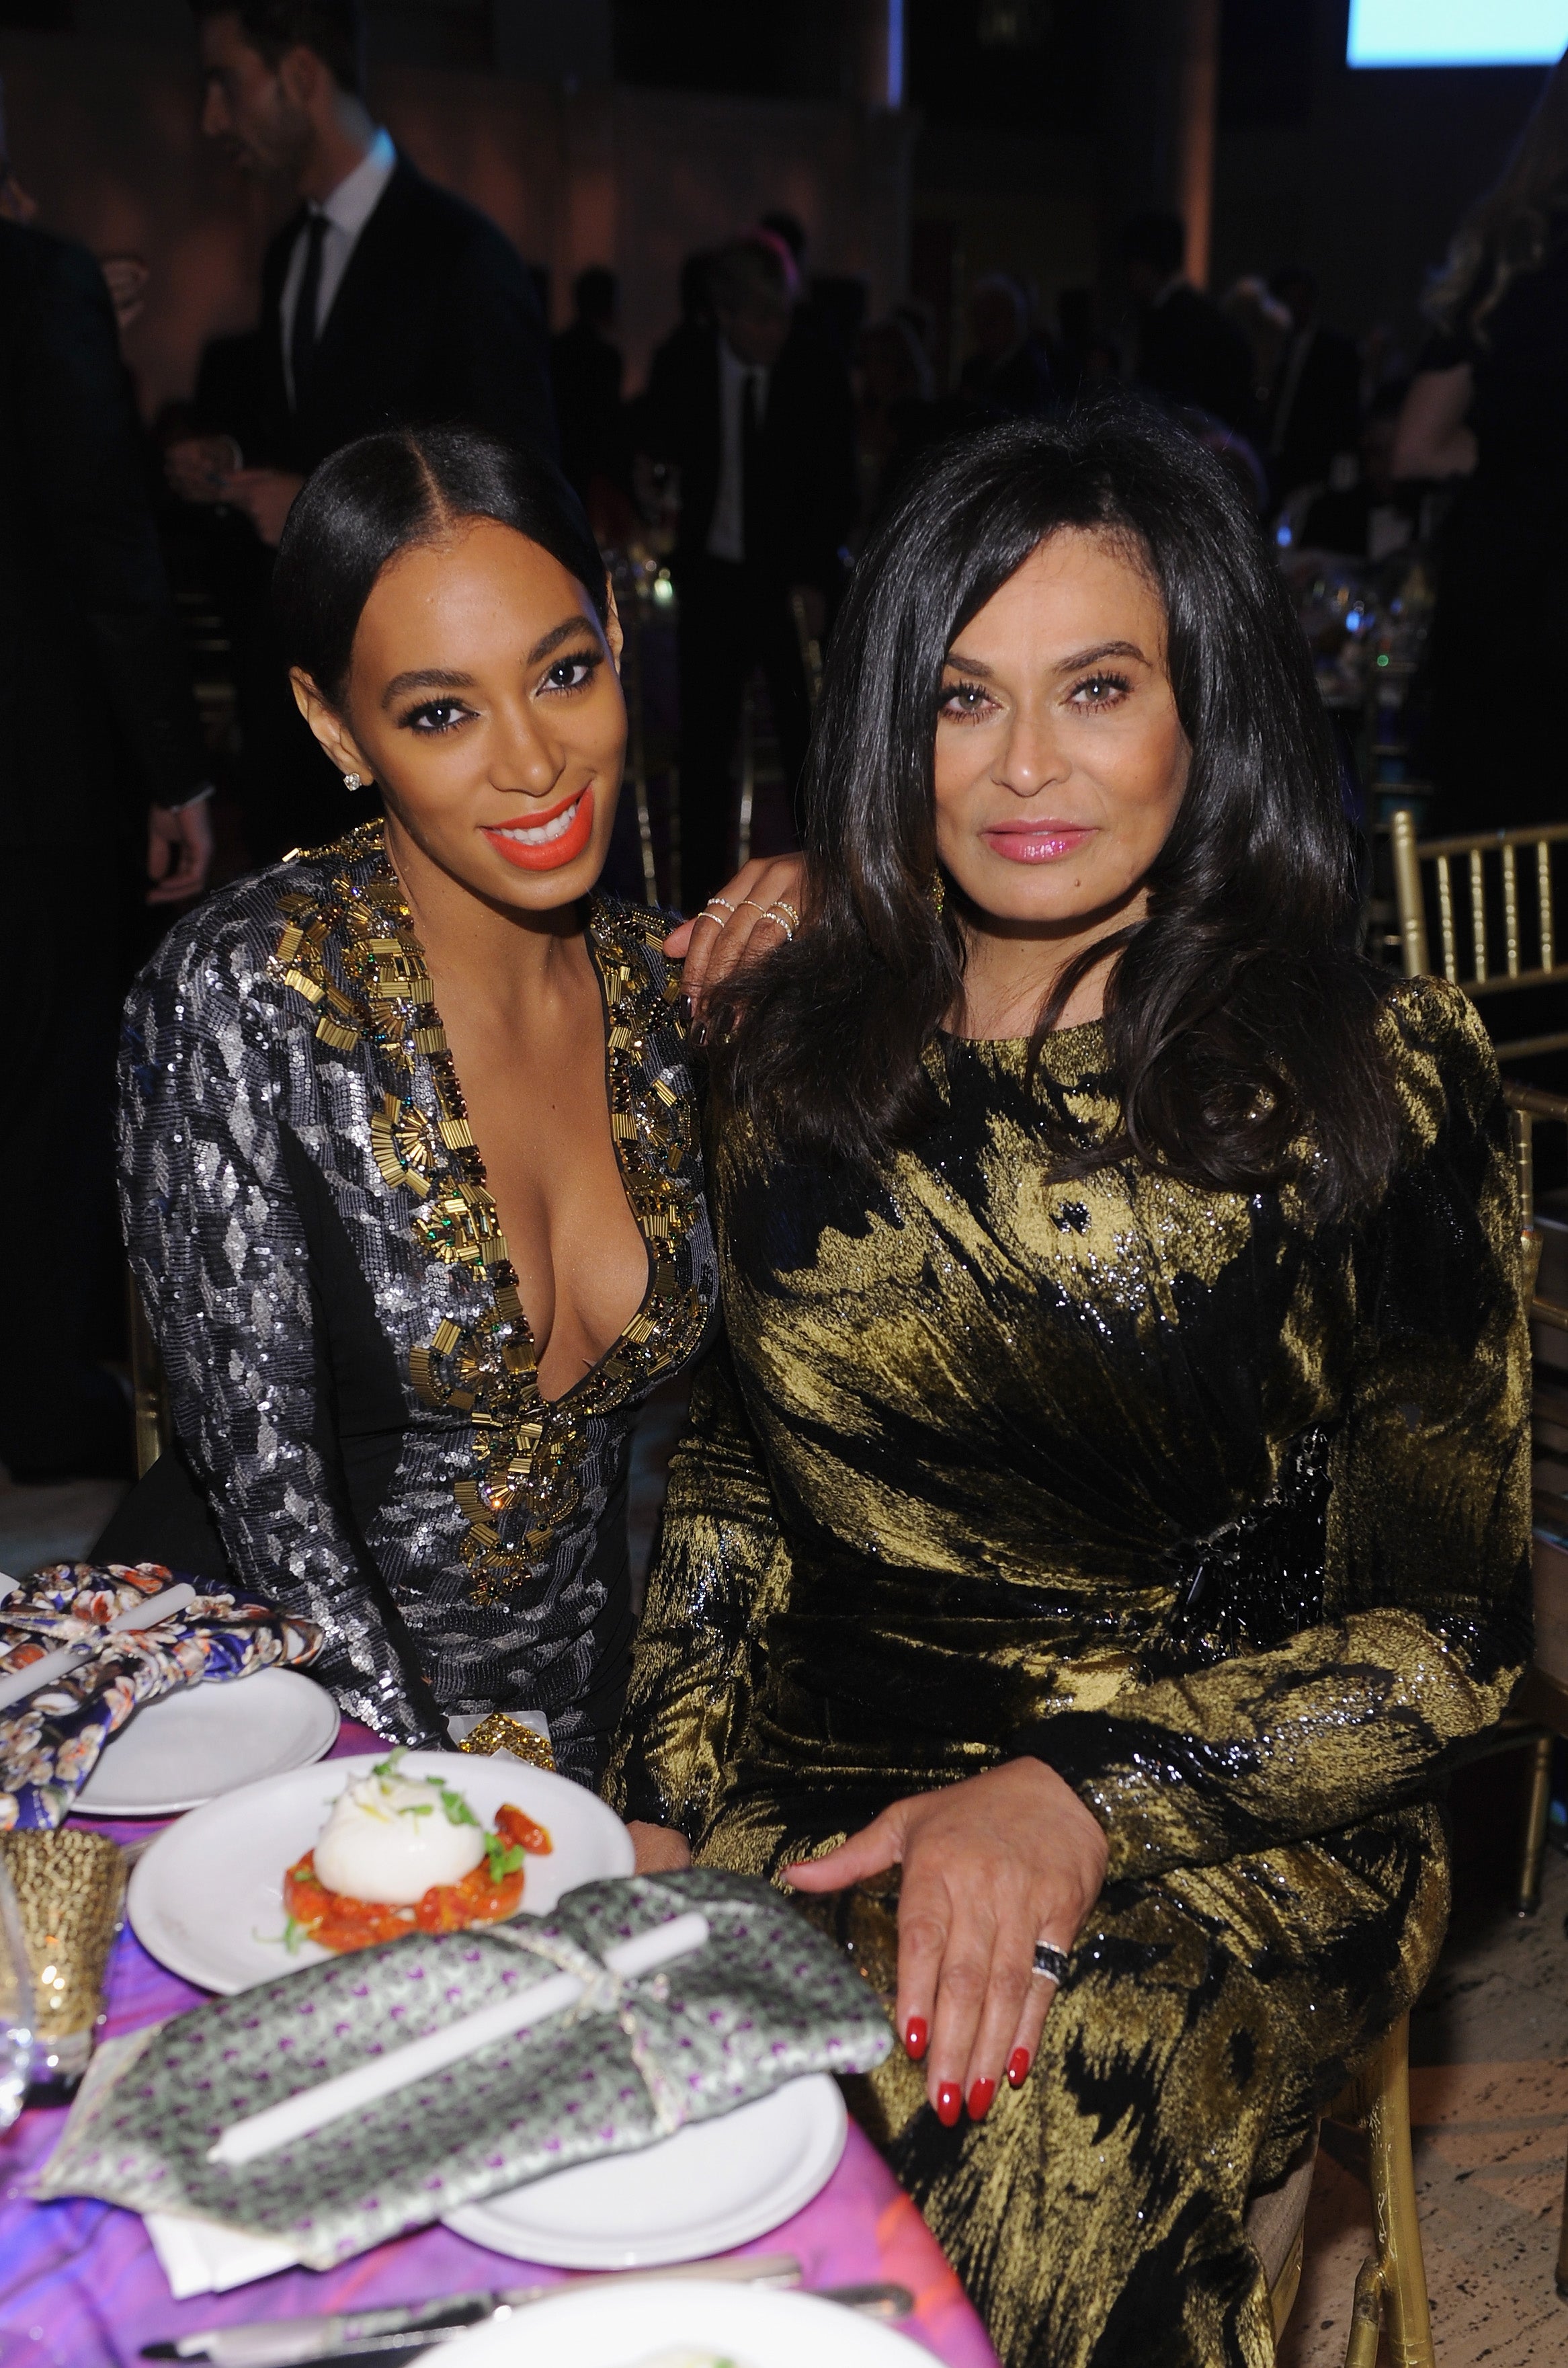 Tina Lawson Reminds us That Solange Has Always Been a Style Trendsetter
